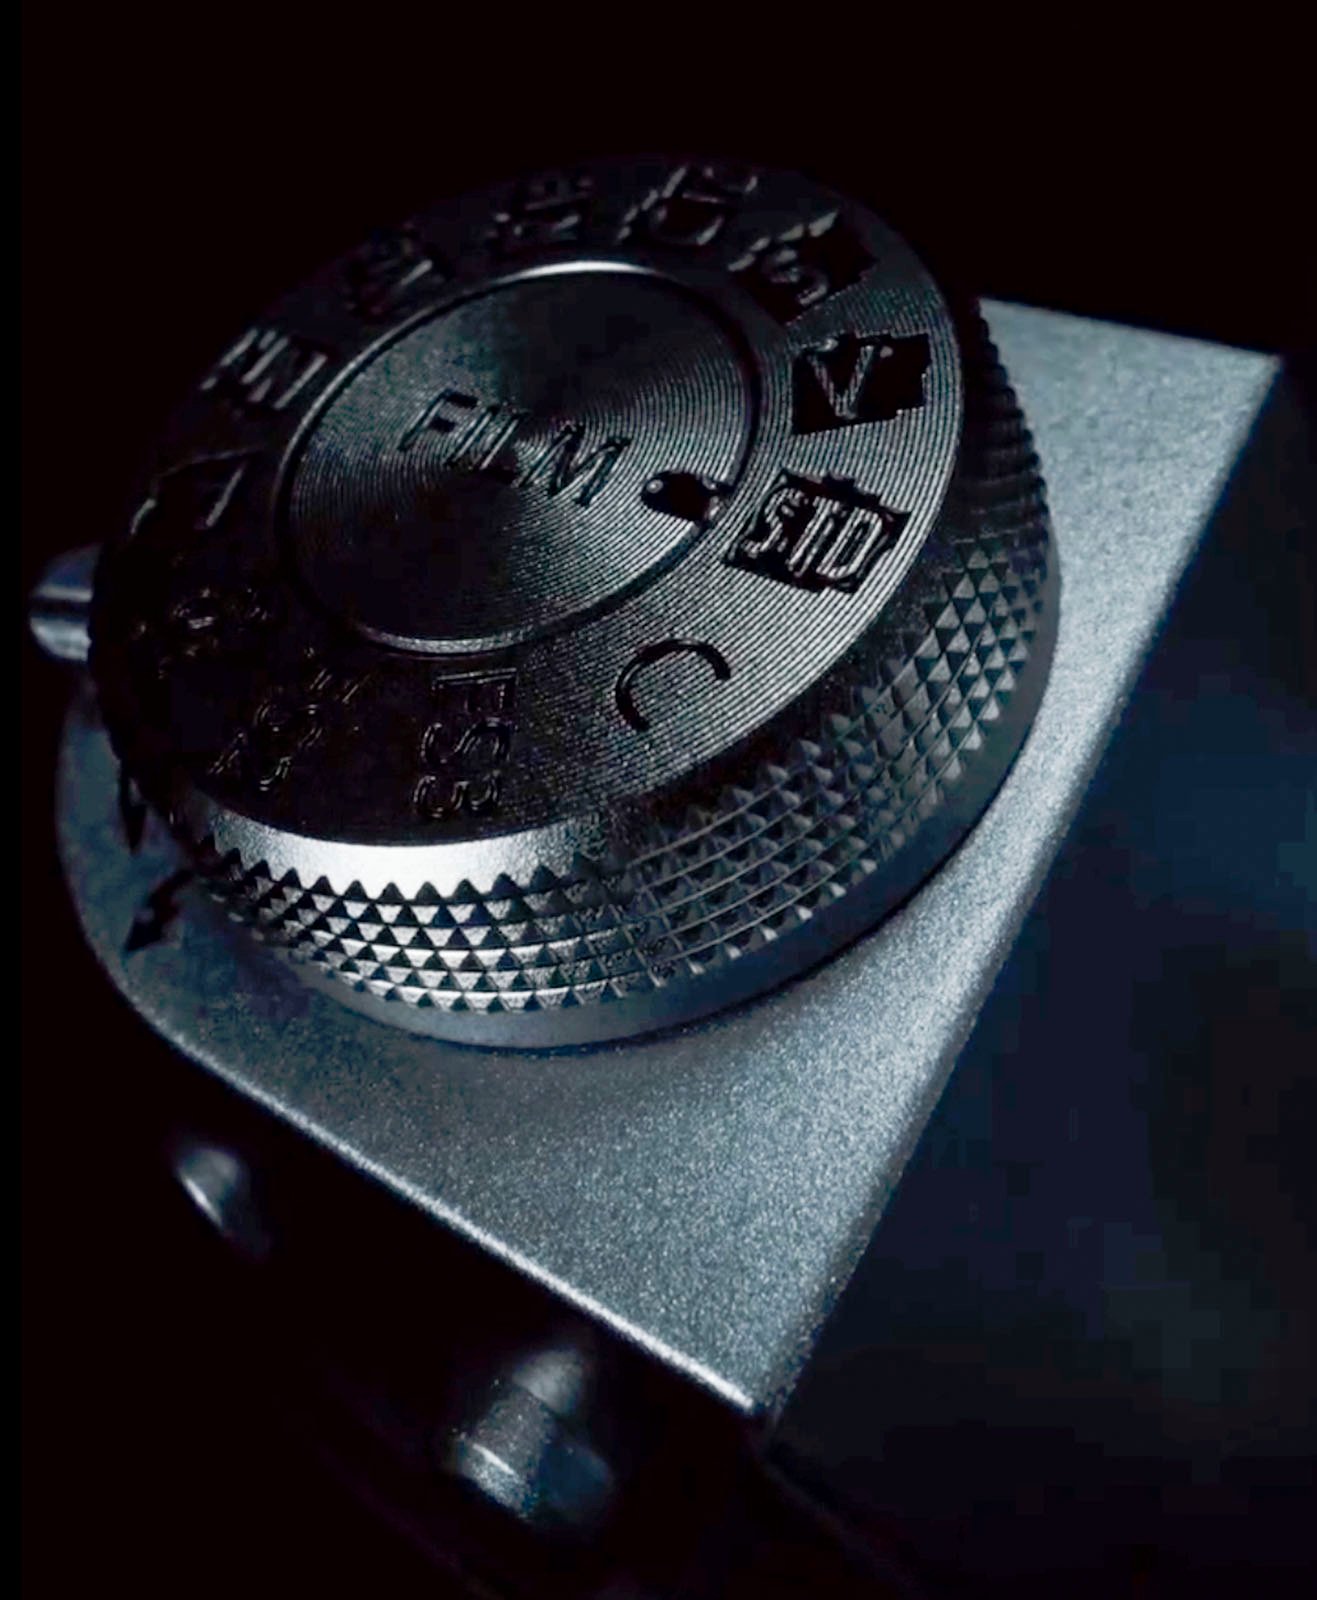 Close-up of a camera's mode dial showing various settings such as auto, p, tv, av, and m, highlighted by moody lighting against a dark background.